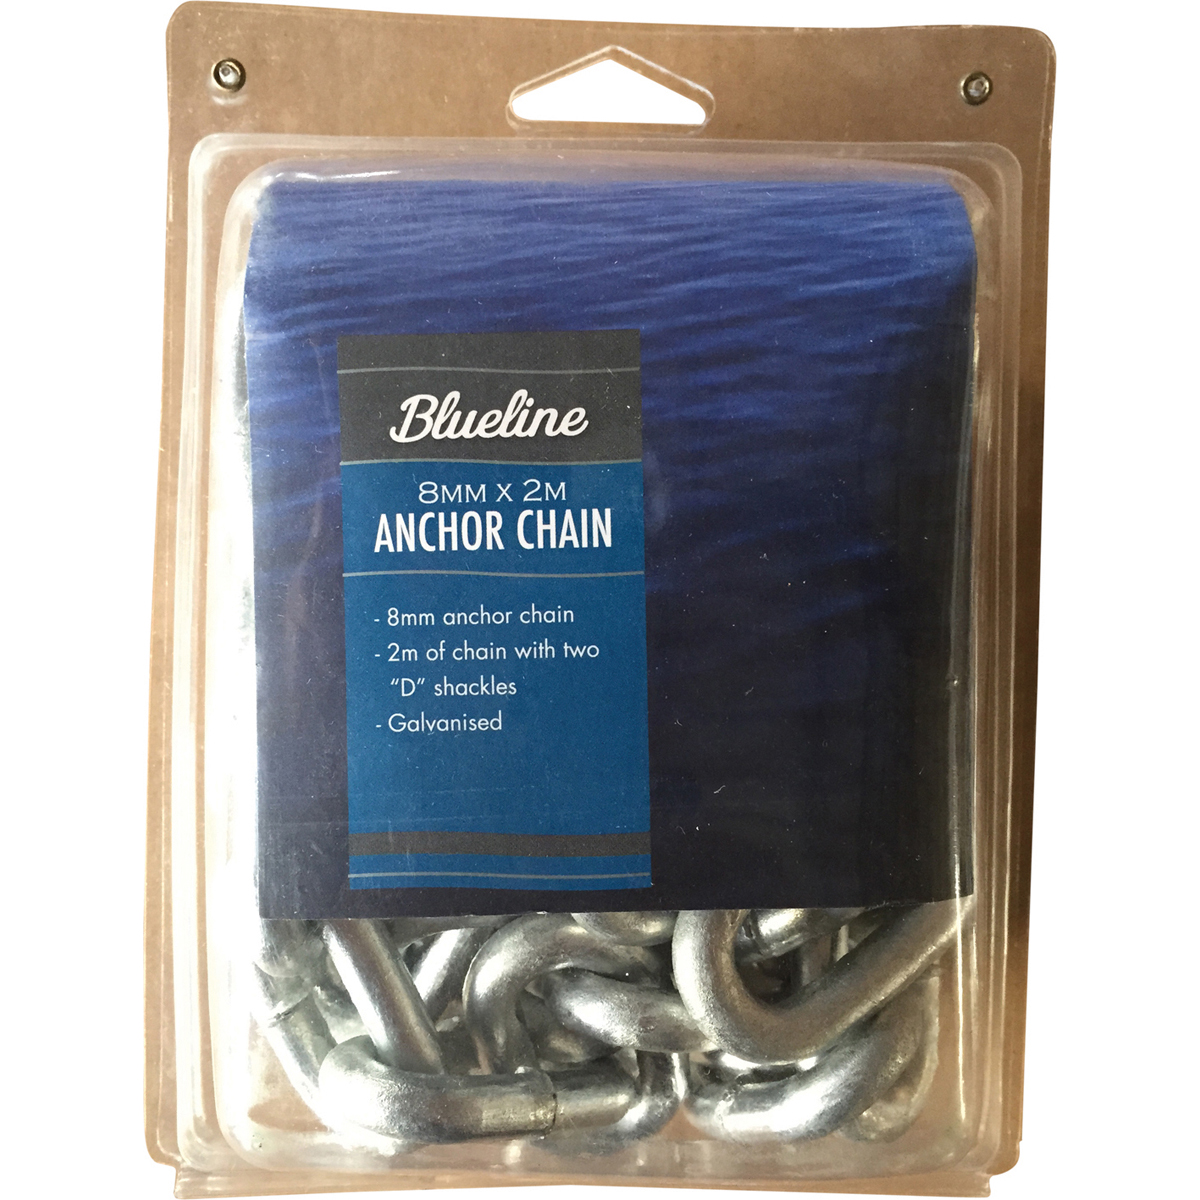 Blueline Anchor Chain with Shackles 6mm x 2m